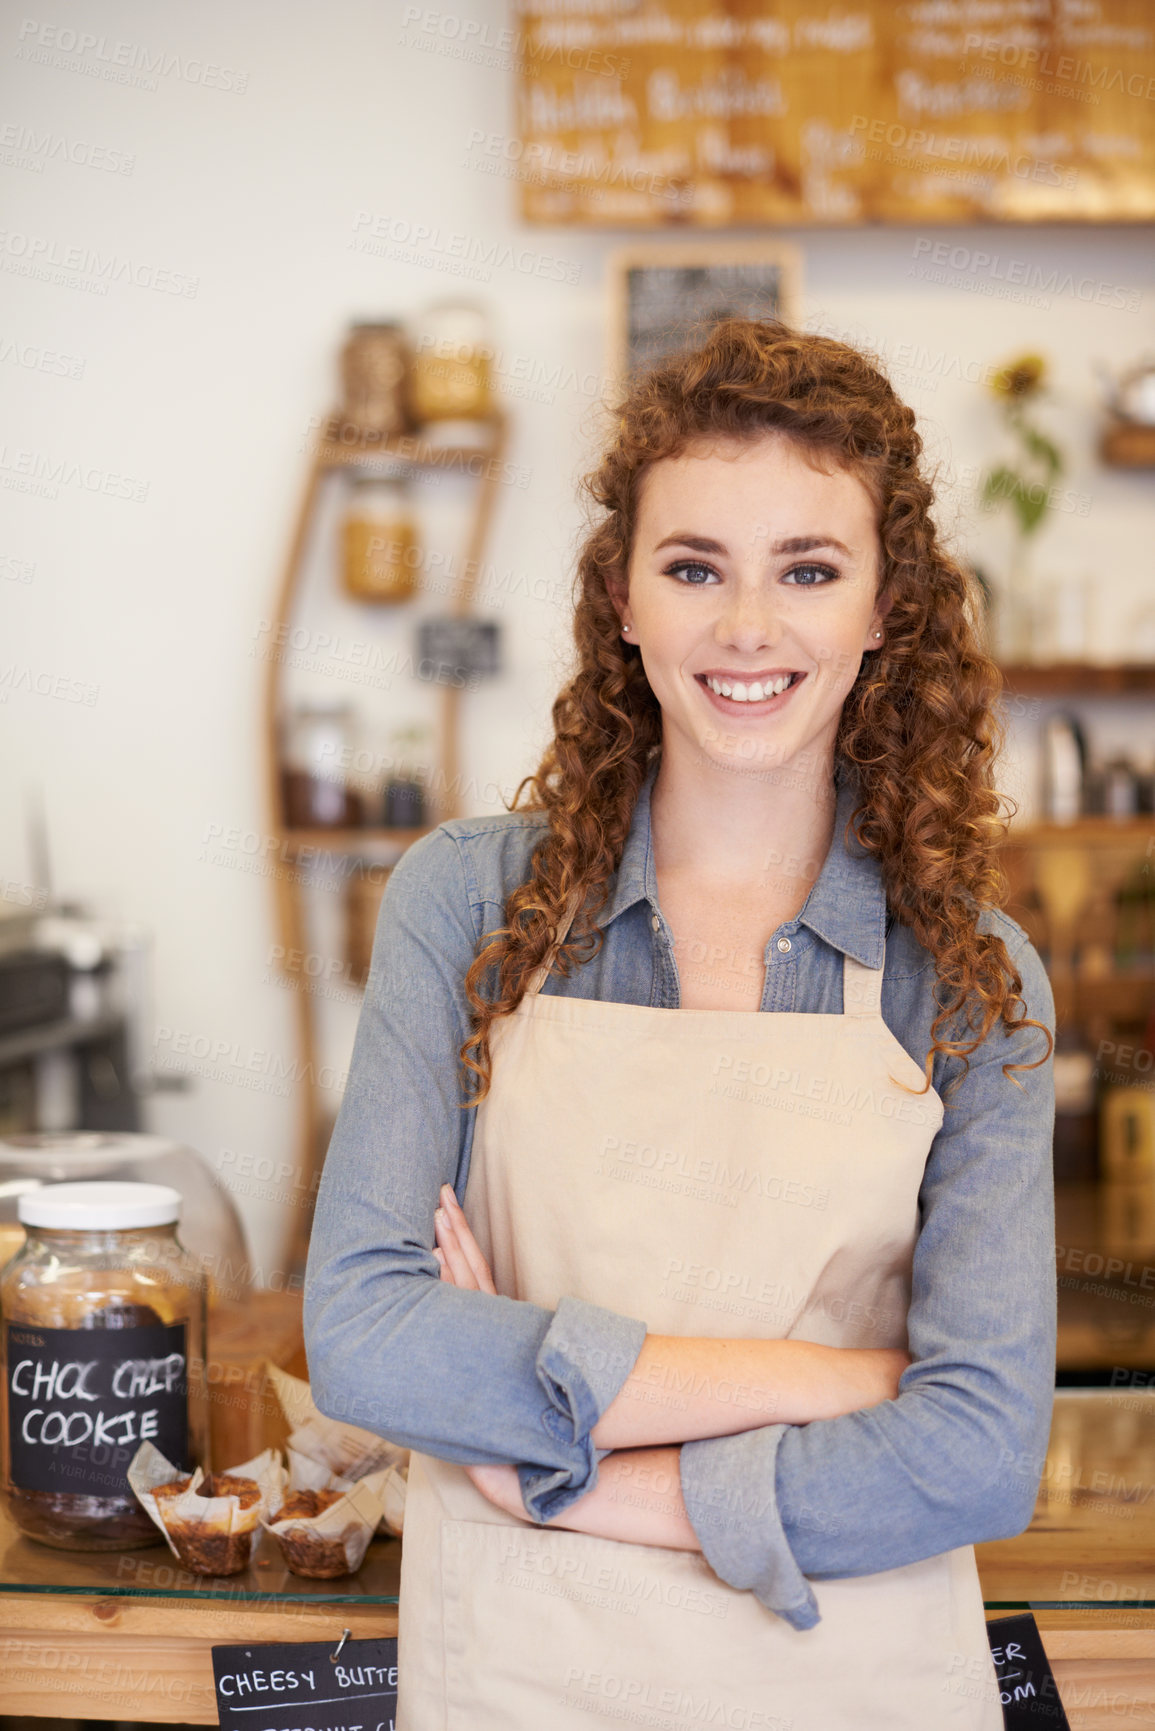 Buy stock photo Portrait, welcome and happy woman with confidence in cafe service with small business owner. Coffee shop, restaurant or waitress with smile, hospitality or entrepreneur with arms crossed at startup.